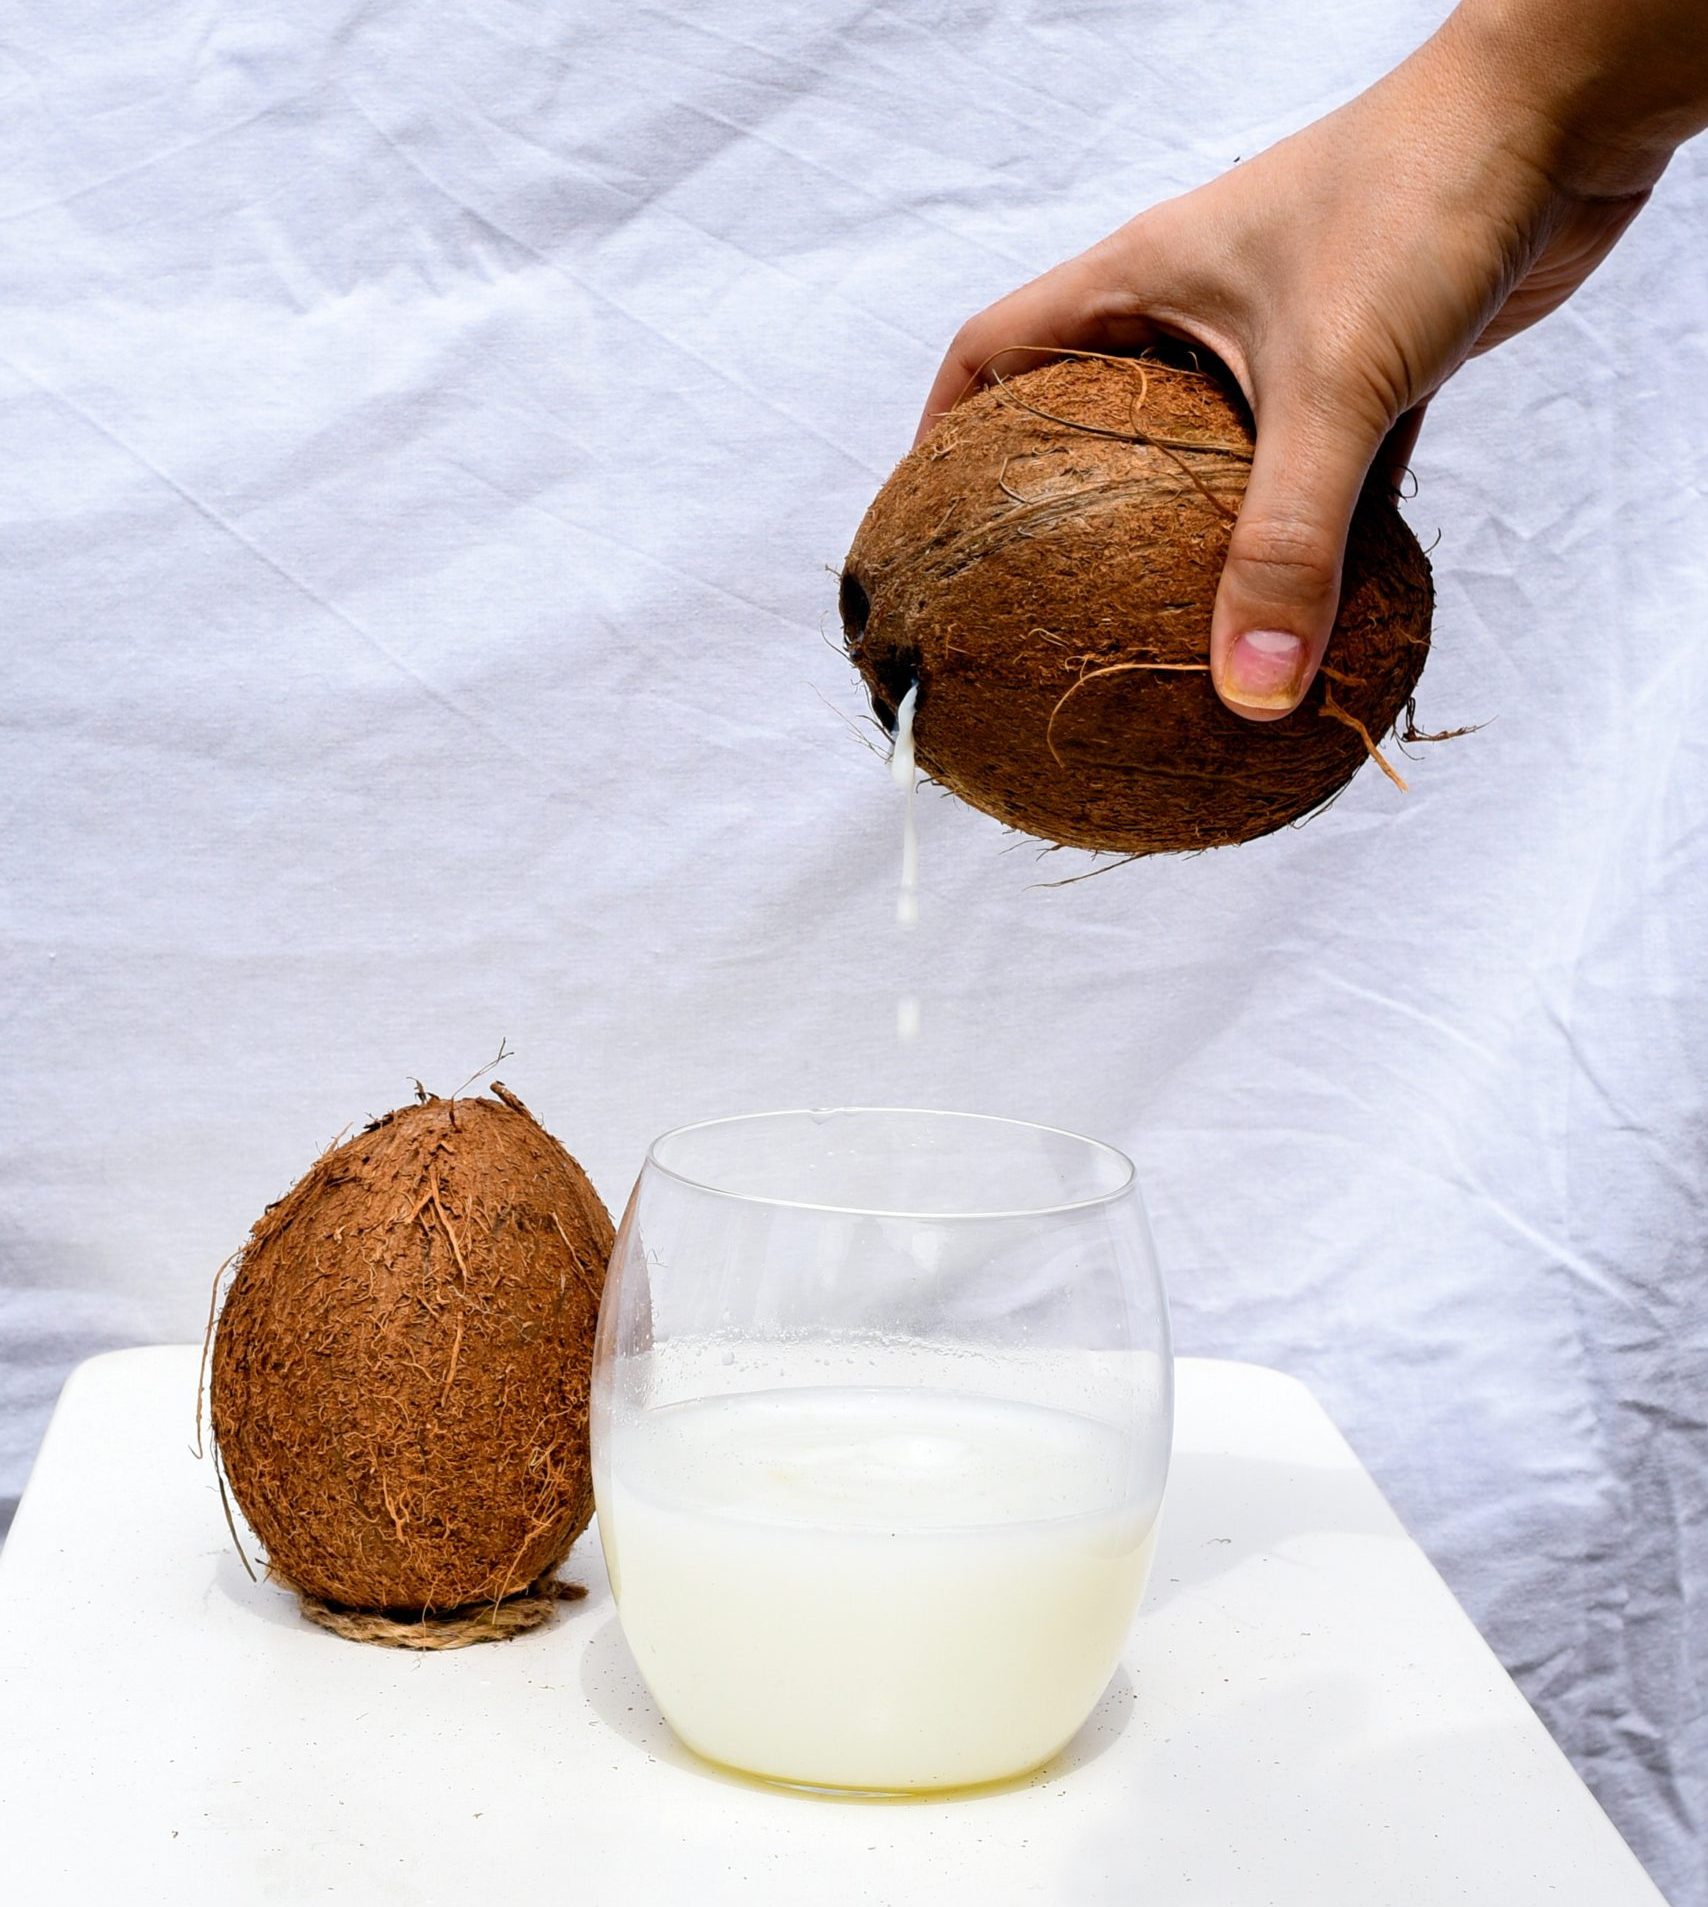 The Coconut Water Challenge: How Much Can You Drink in One Sitting?